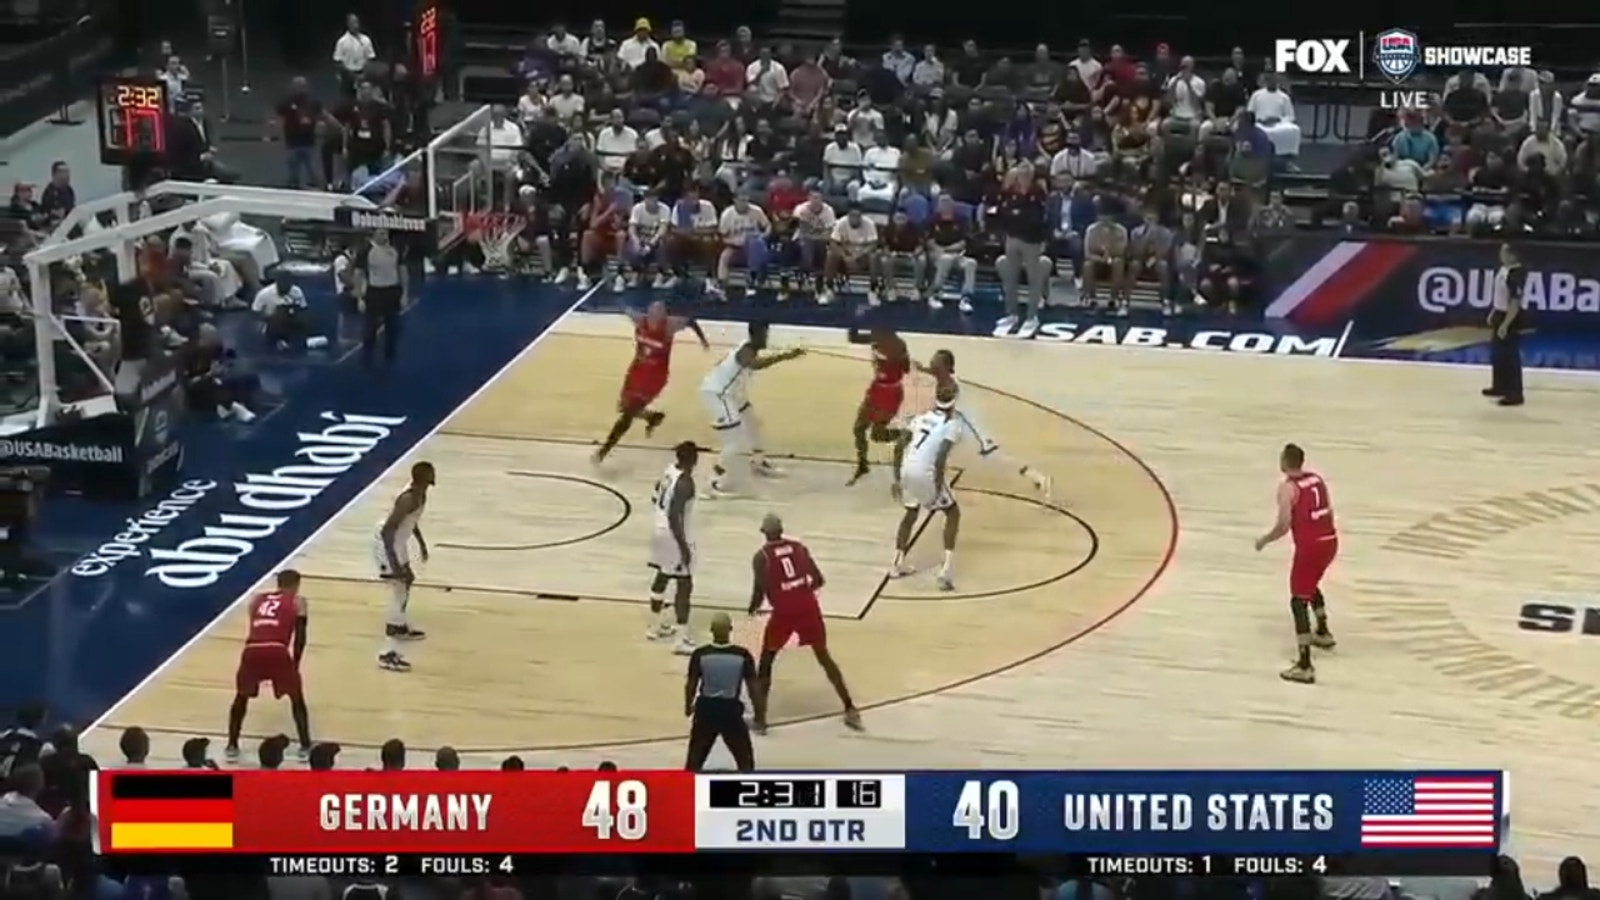 Dennis Schröder lobs it up to Daniel Theis for an alley-oop, extending Germany's lead vs. Team USA